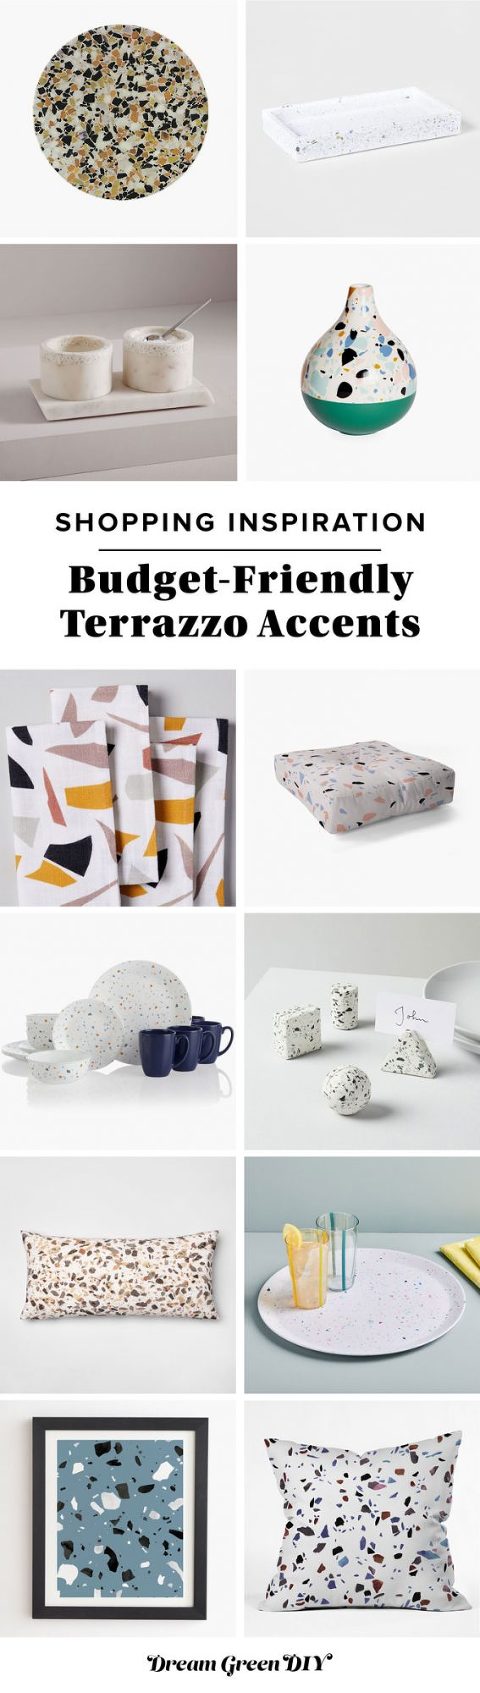 Budget-Friendly Terrazzo Home Accents